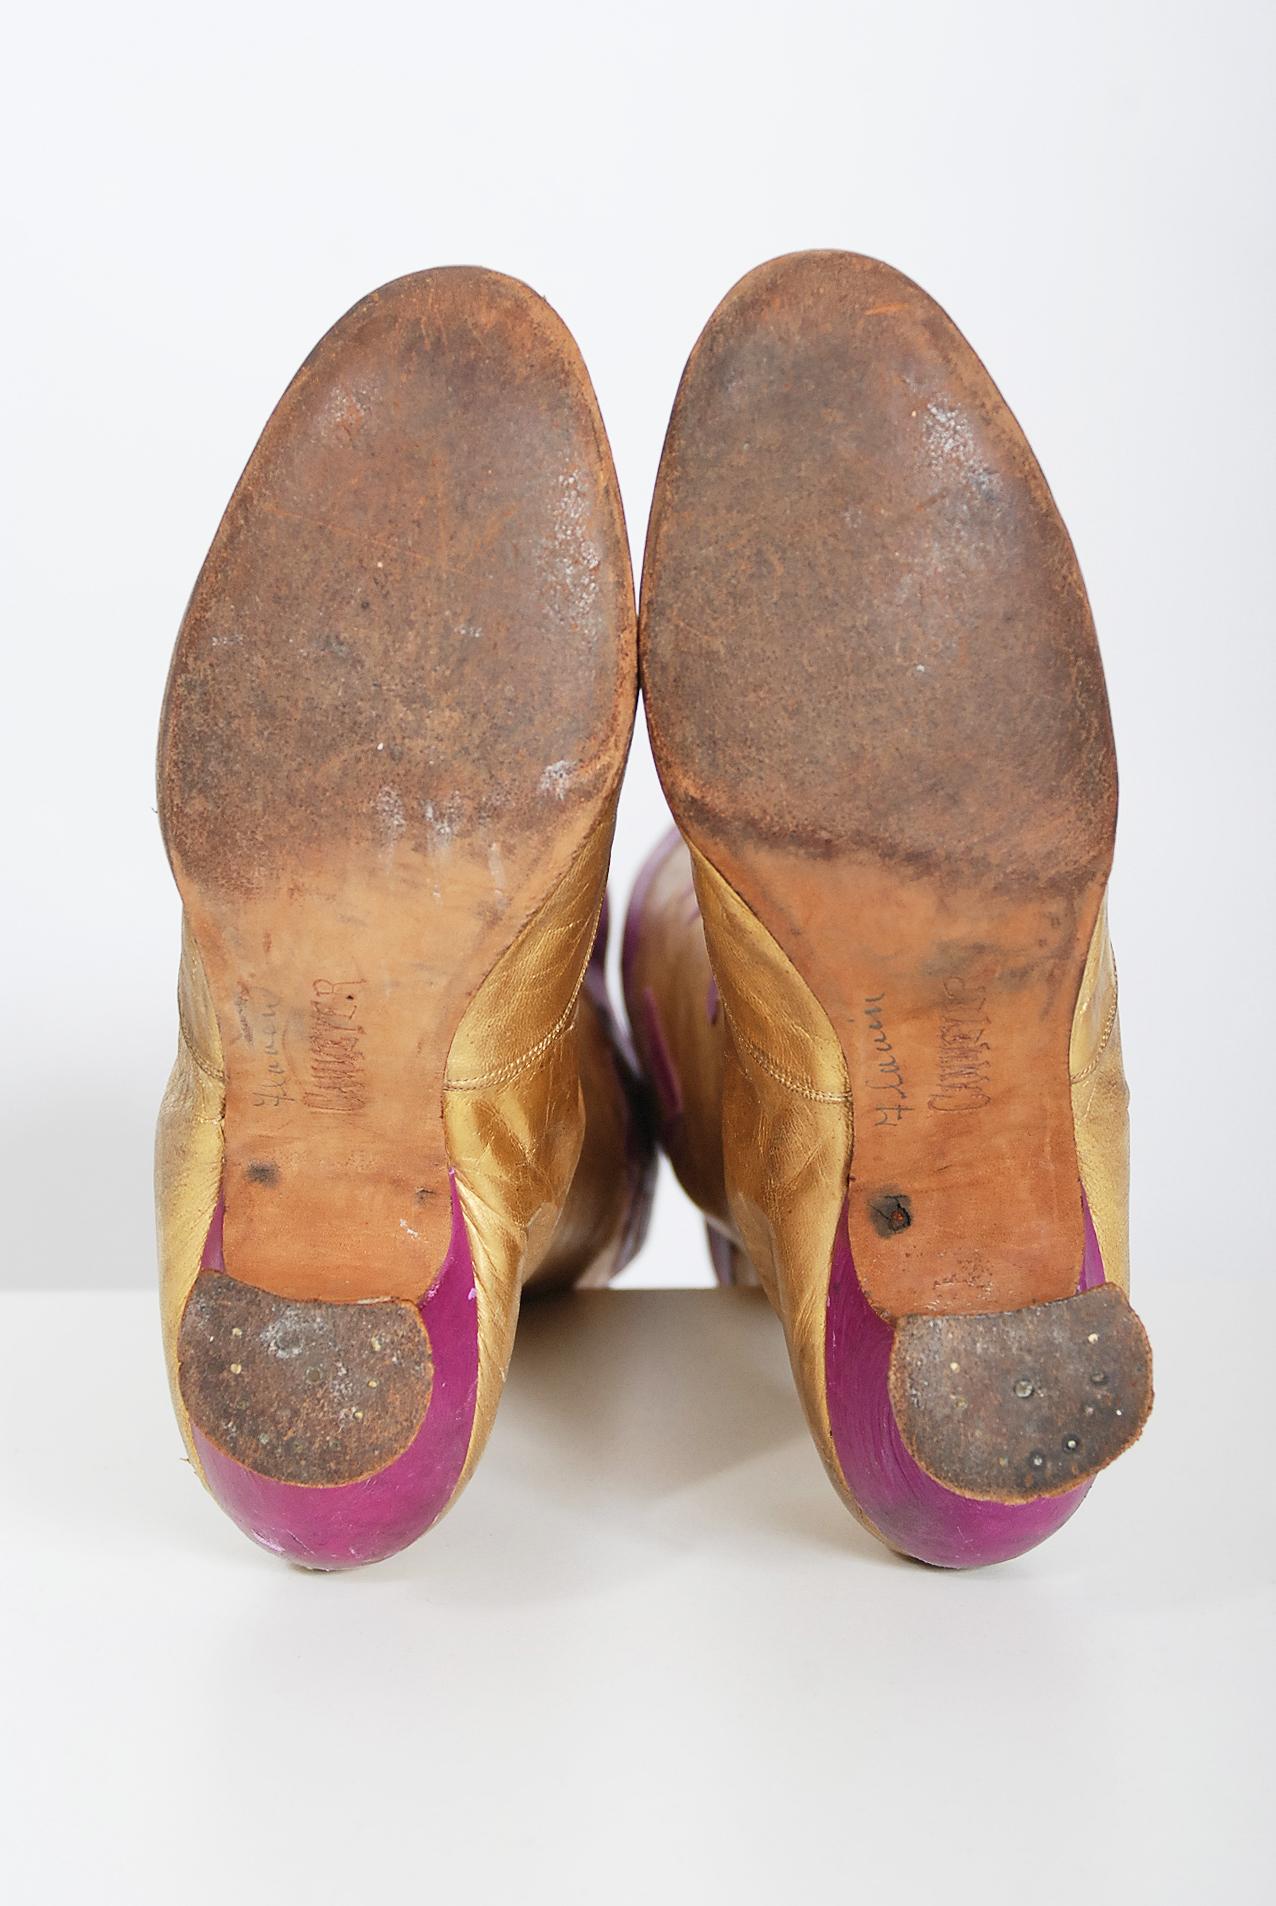 Vintage 1890's Cammeyer Couture Gold & Purple Leather Lace-Up Victorian Boots  For Sale 1